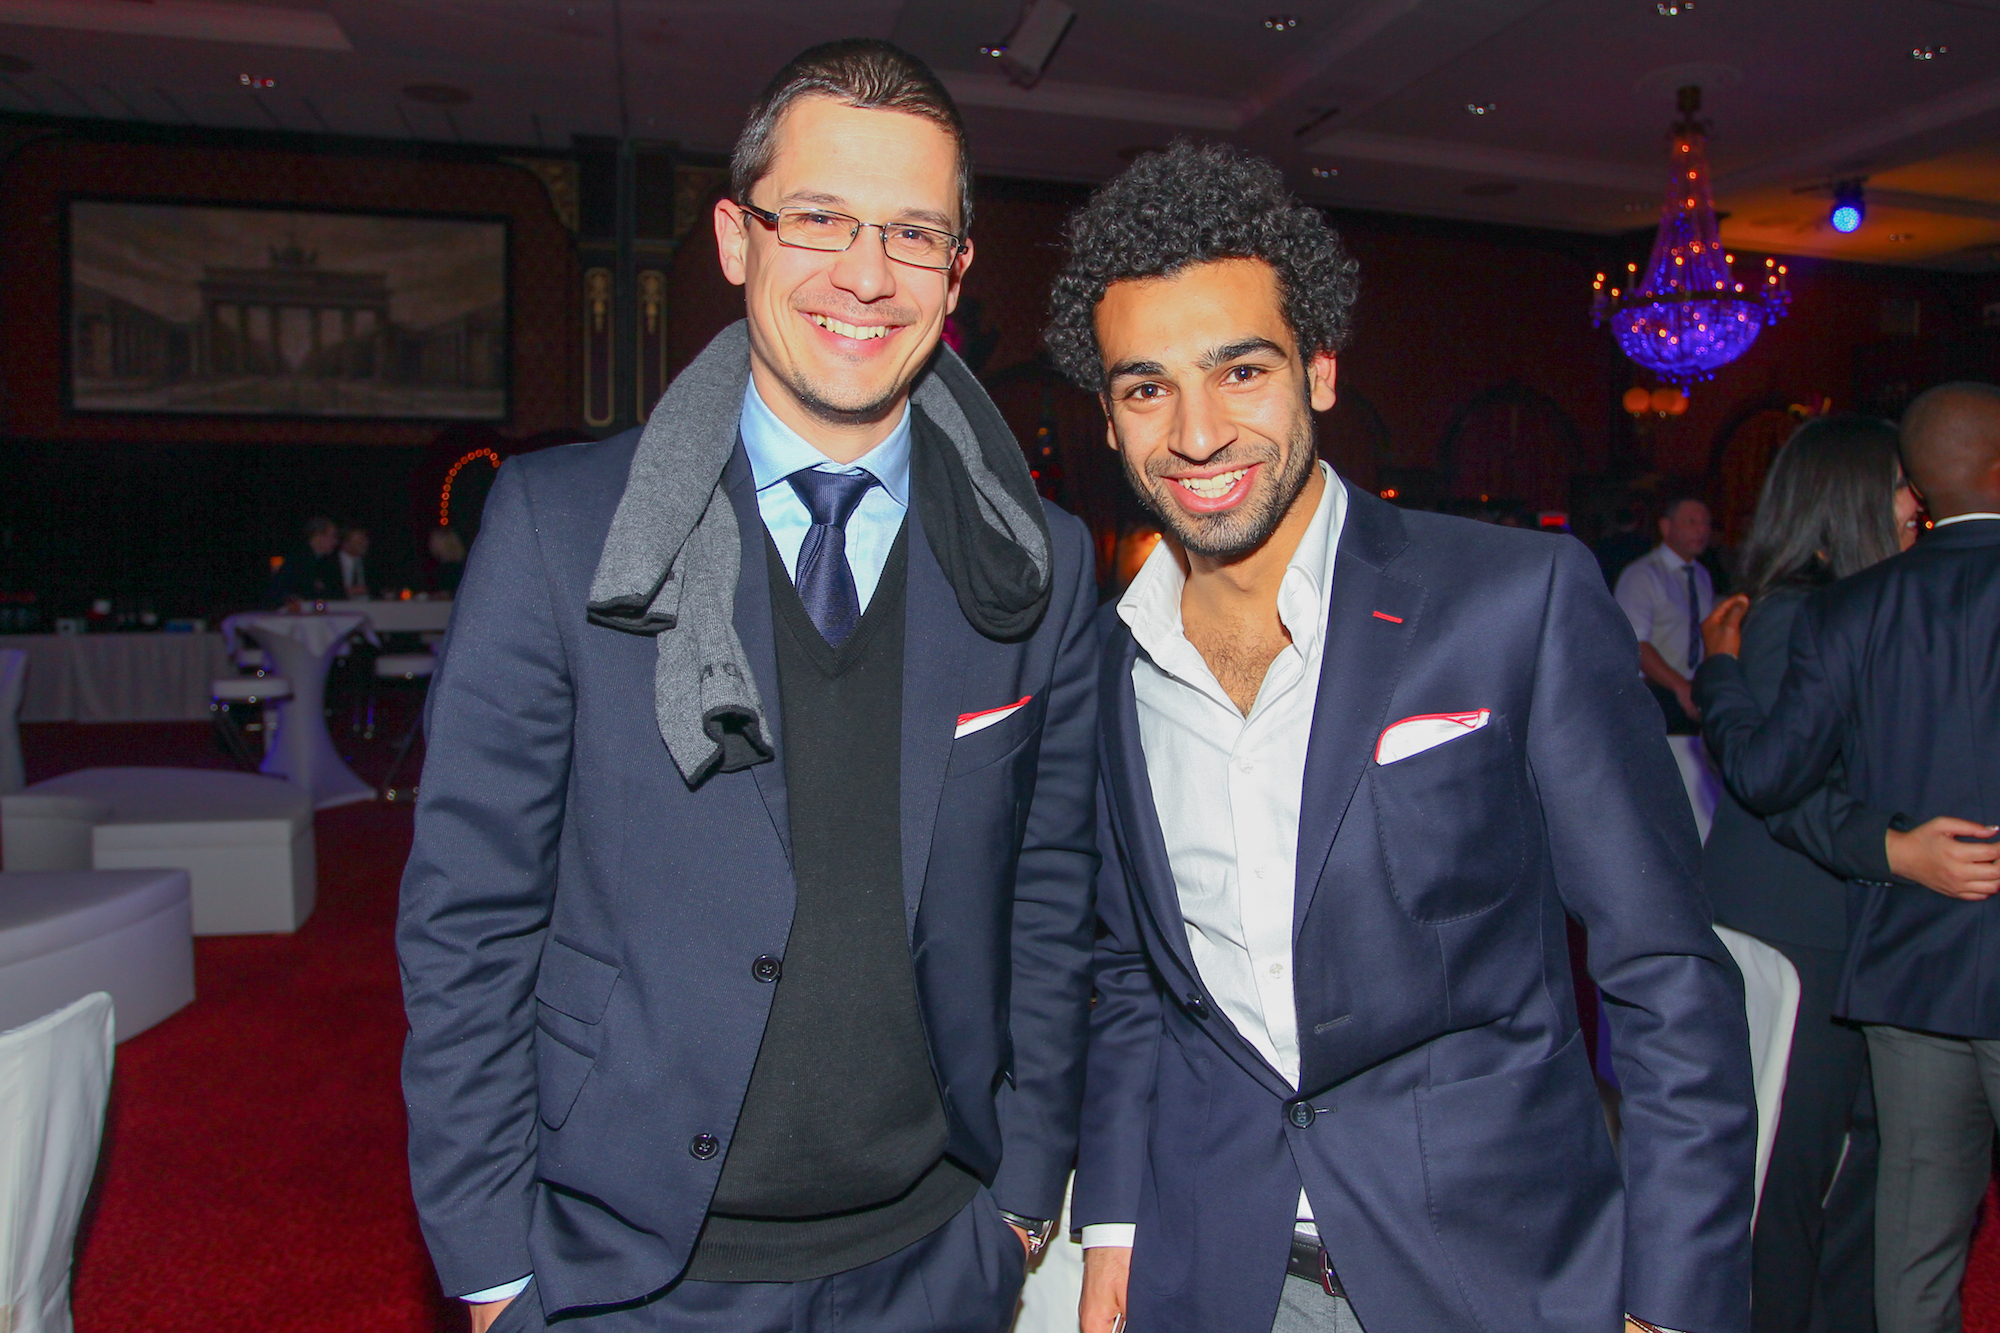 Pascal Naef und Mohamed Salah, FCB Weihnachtsanlass, im Europa-Park in Rust, am 03.12.2012